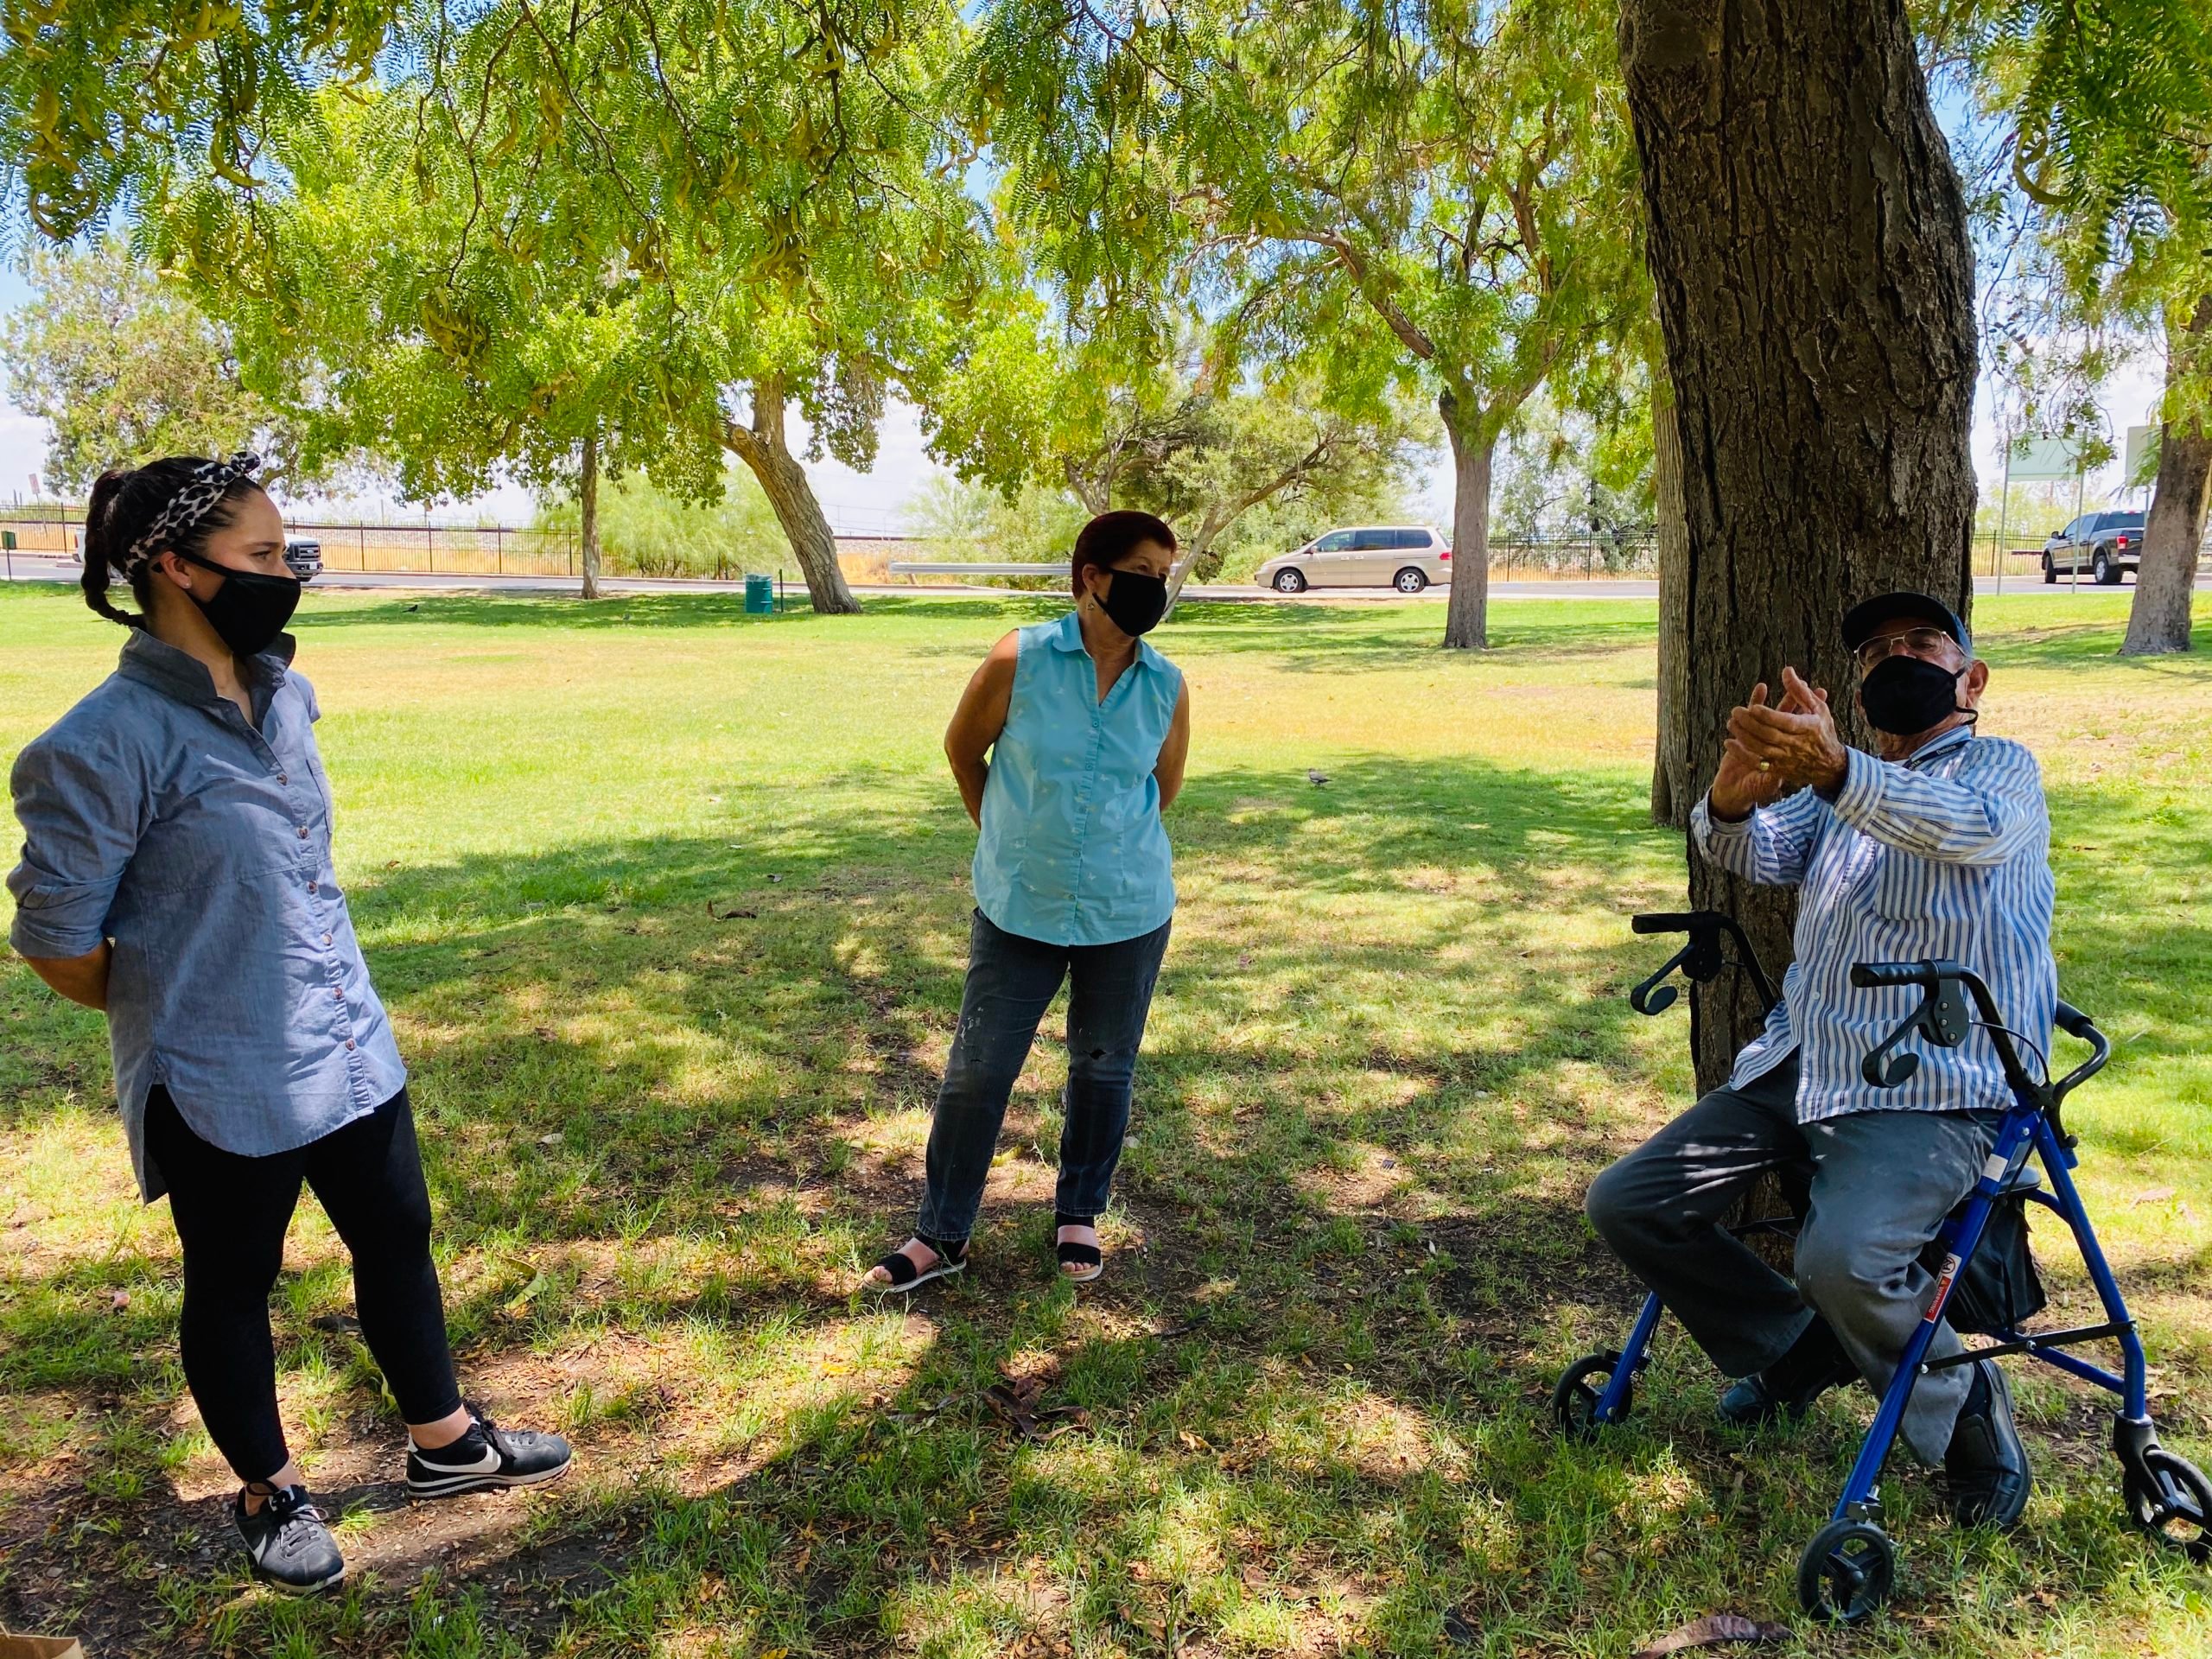 Walmart shooting survivors Adria Gonzalez, her mother Agueda Ponce Torres and Eduardo Castro reunited at Memorial Park in El Paso nearly a year after the August 3, 2019 attack.